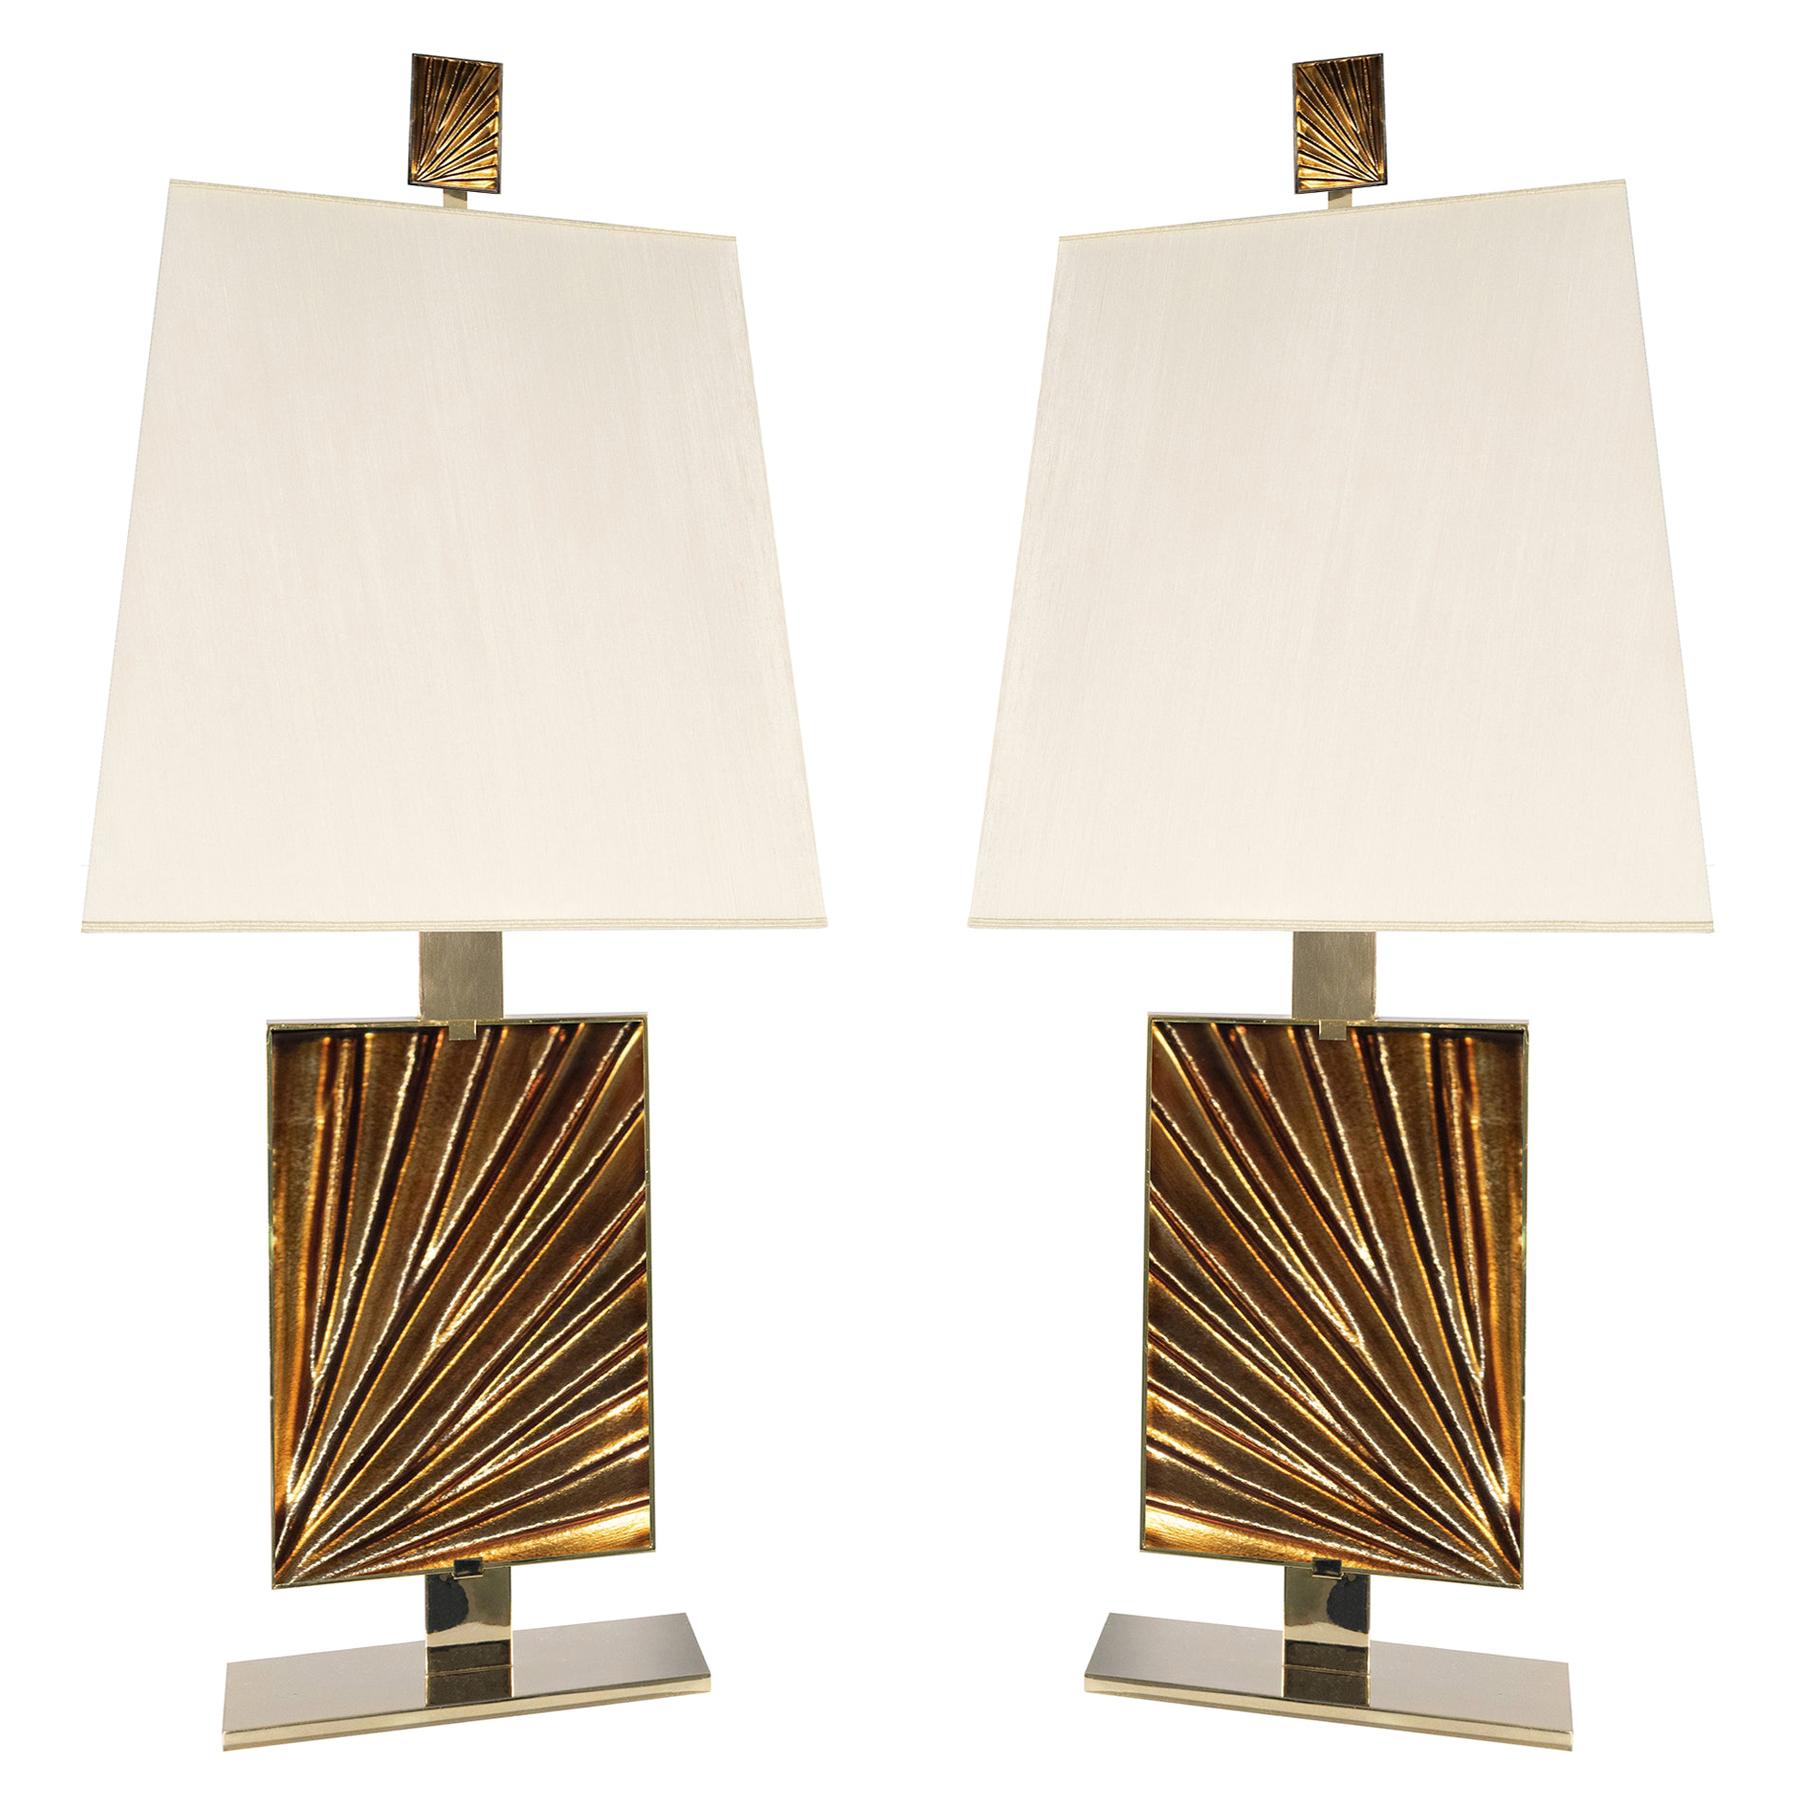 Contemporary by Ghirò Studio 'Ambra' Set of Two Table Lamps Crystal and 24ktGold